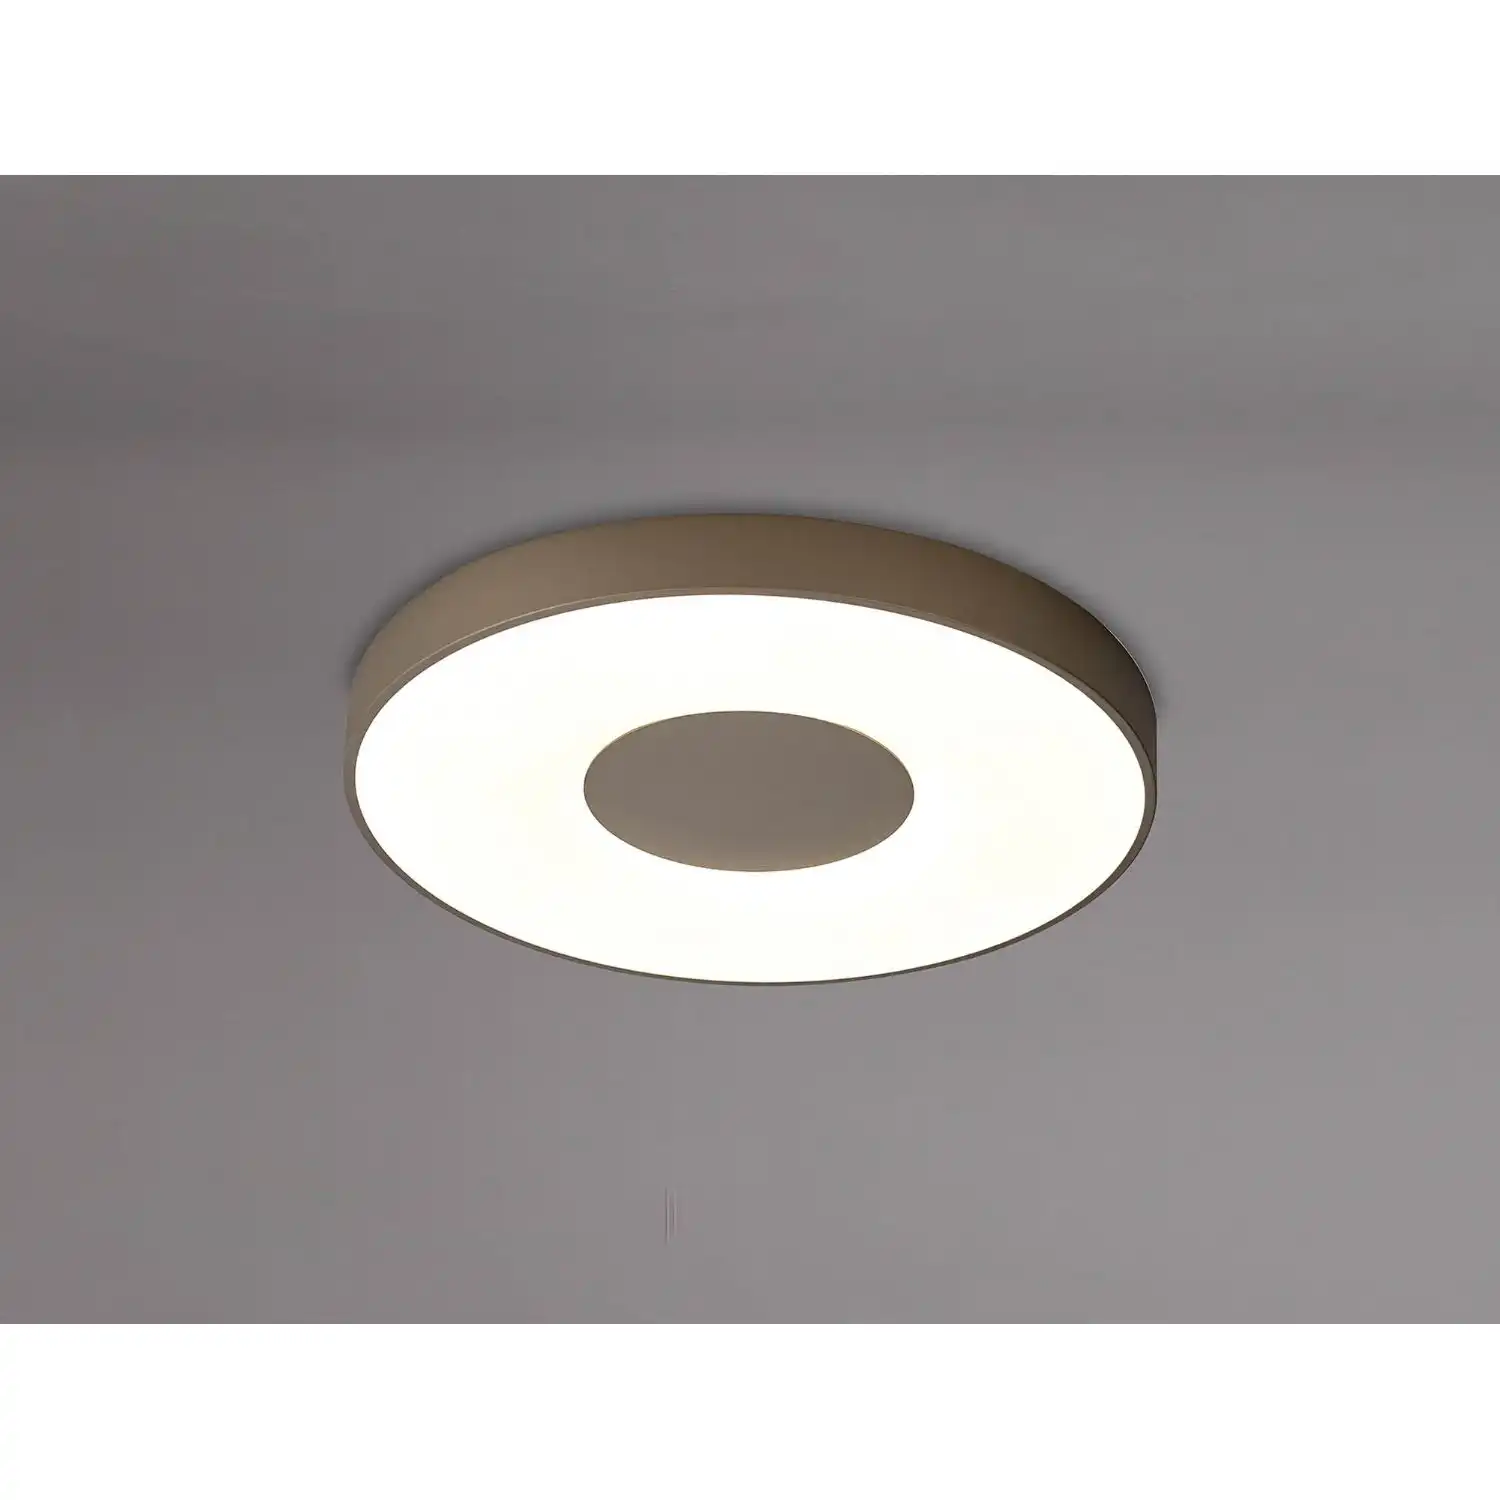 Coin Round Ceiling 80W LED With Remote Control 2700K 5000K, 3900lm, Sand Brown, 3yrs Warranty